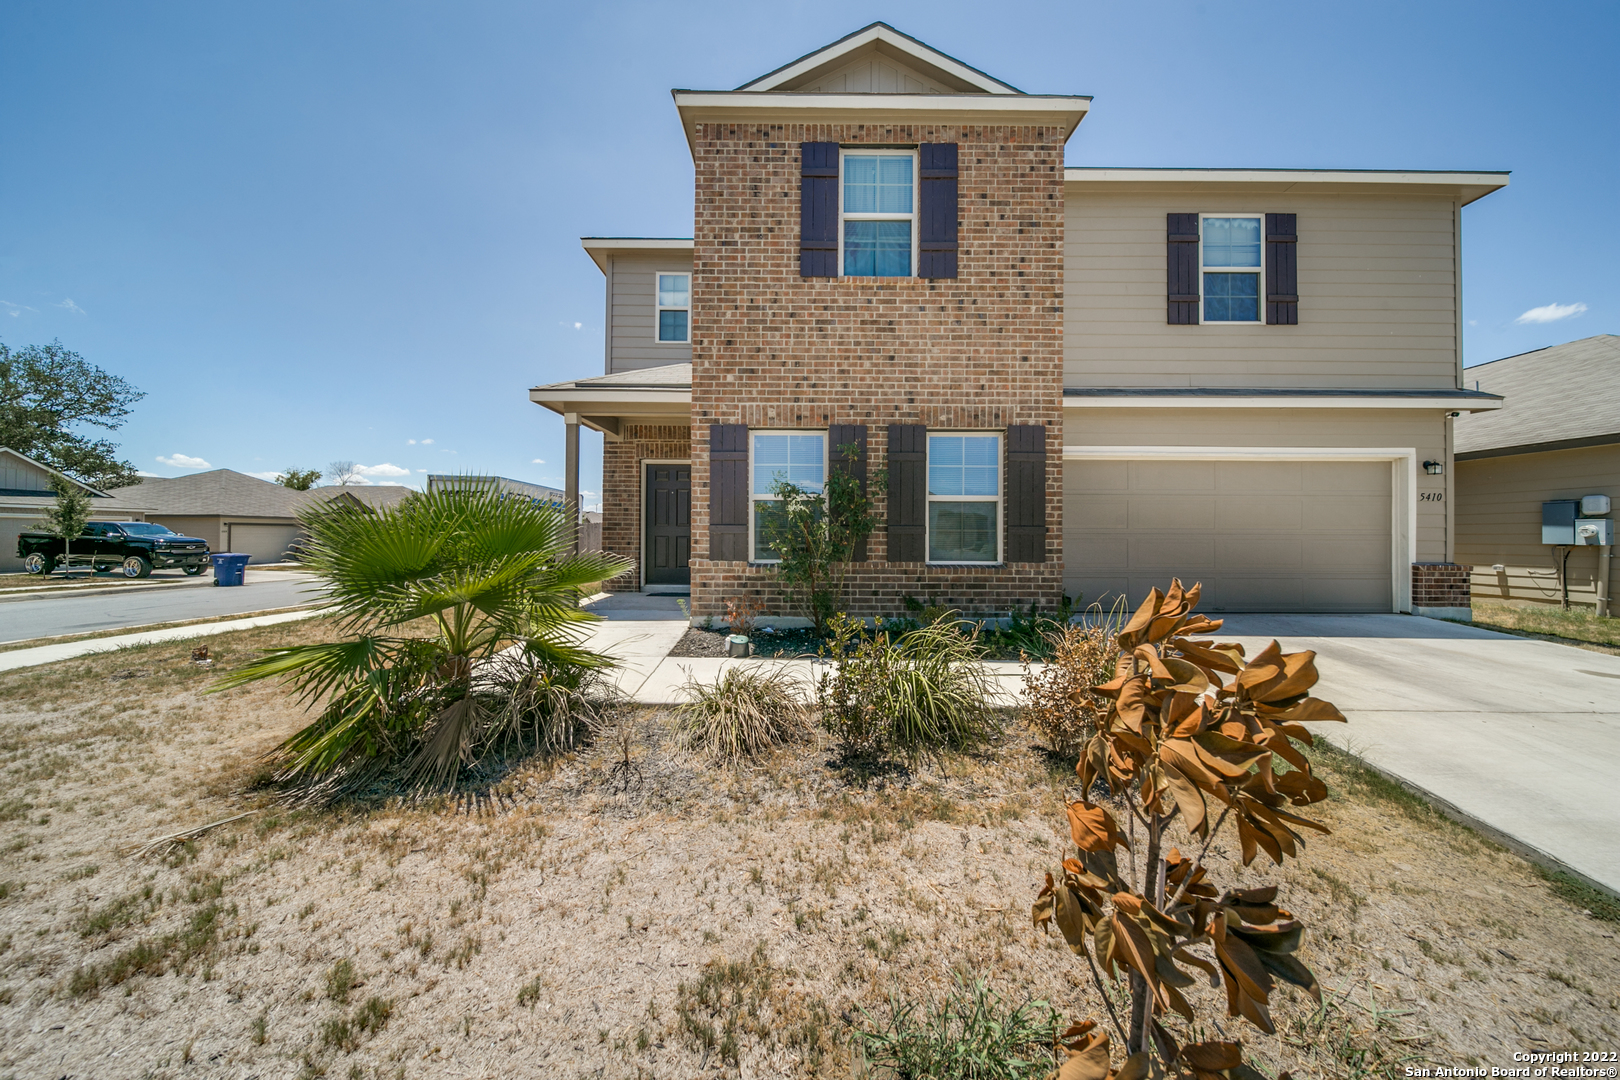 Showings will begin Sunday Aug 7, 2022. Welcome to this beautiful 4 bed 2 1/2 bath in the brand new neighborhood of Sage Valley. This home was built in 2019, has an open floor plan, all rooms upstairs with a large loft that can be used as an office, game room or media room.   Property is located on a corner lot with a spacious backyard. Make your appointment today!